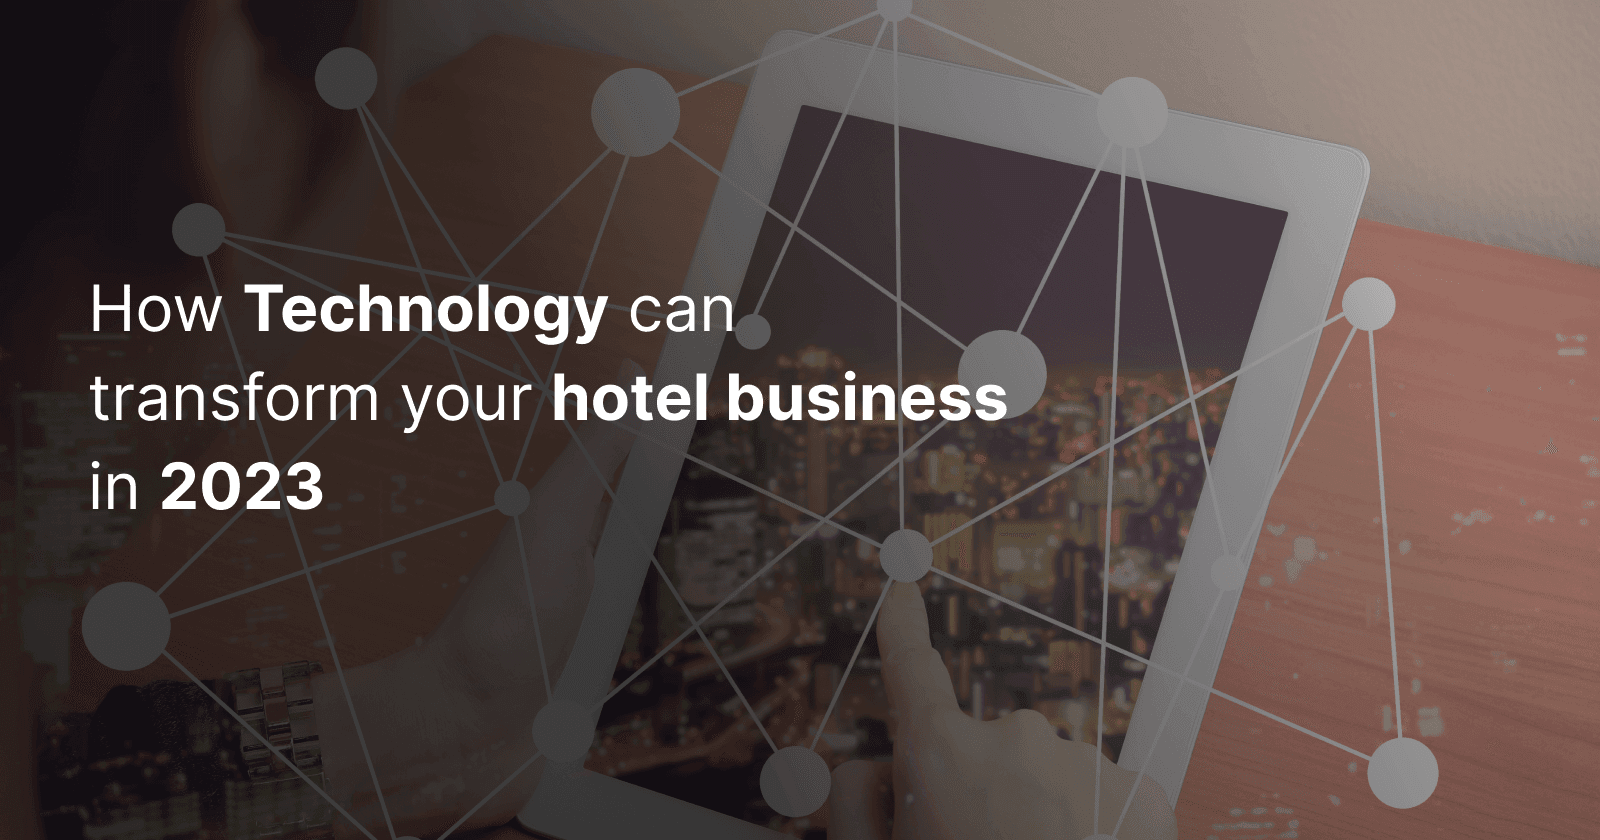 How technology can transform your hotel business in 2023